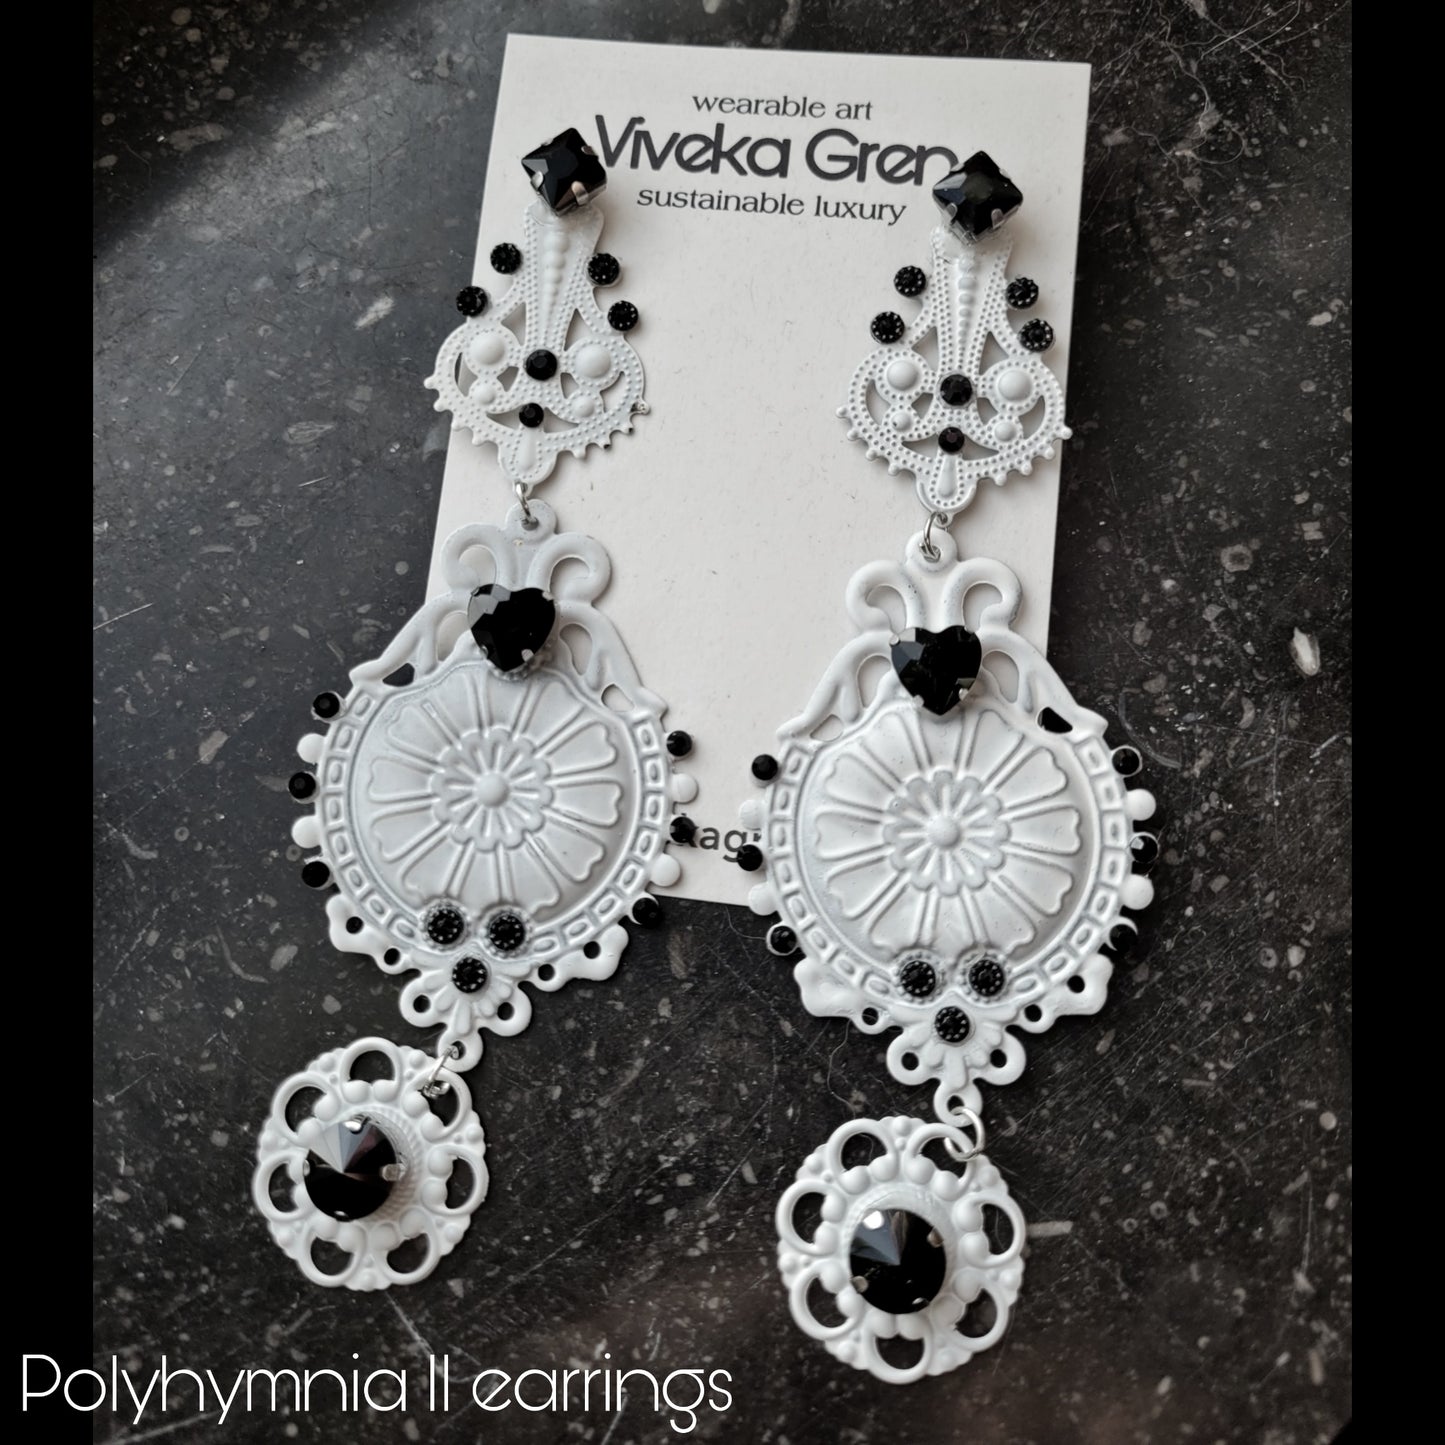 Deusa ex Machina collection: The Polyhymnia earrings (stud versions)